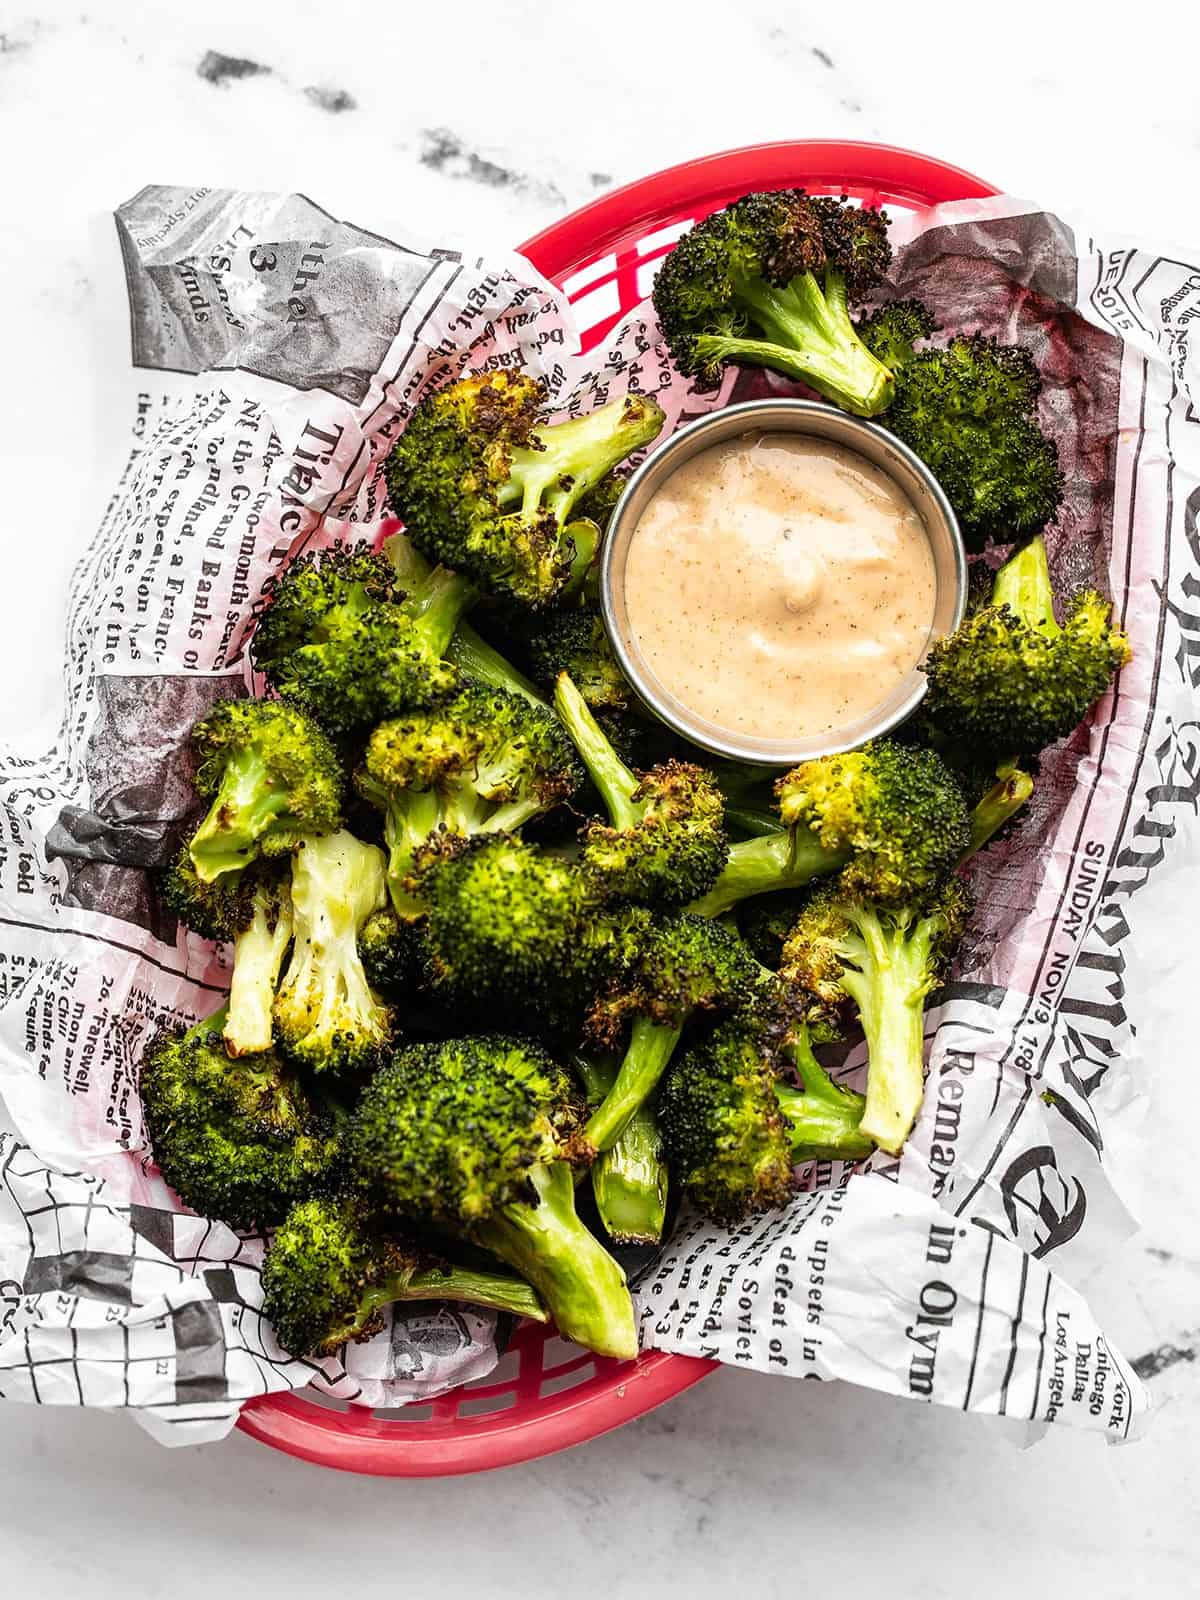 roasted broccoli with comeback sauce in a red plastic basket with paper liner